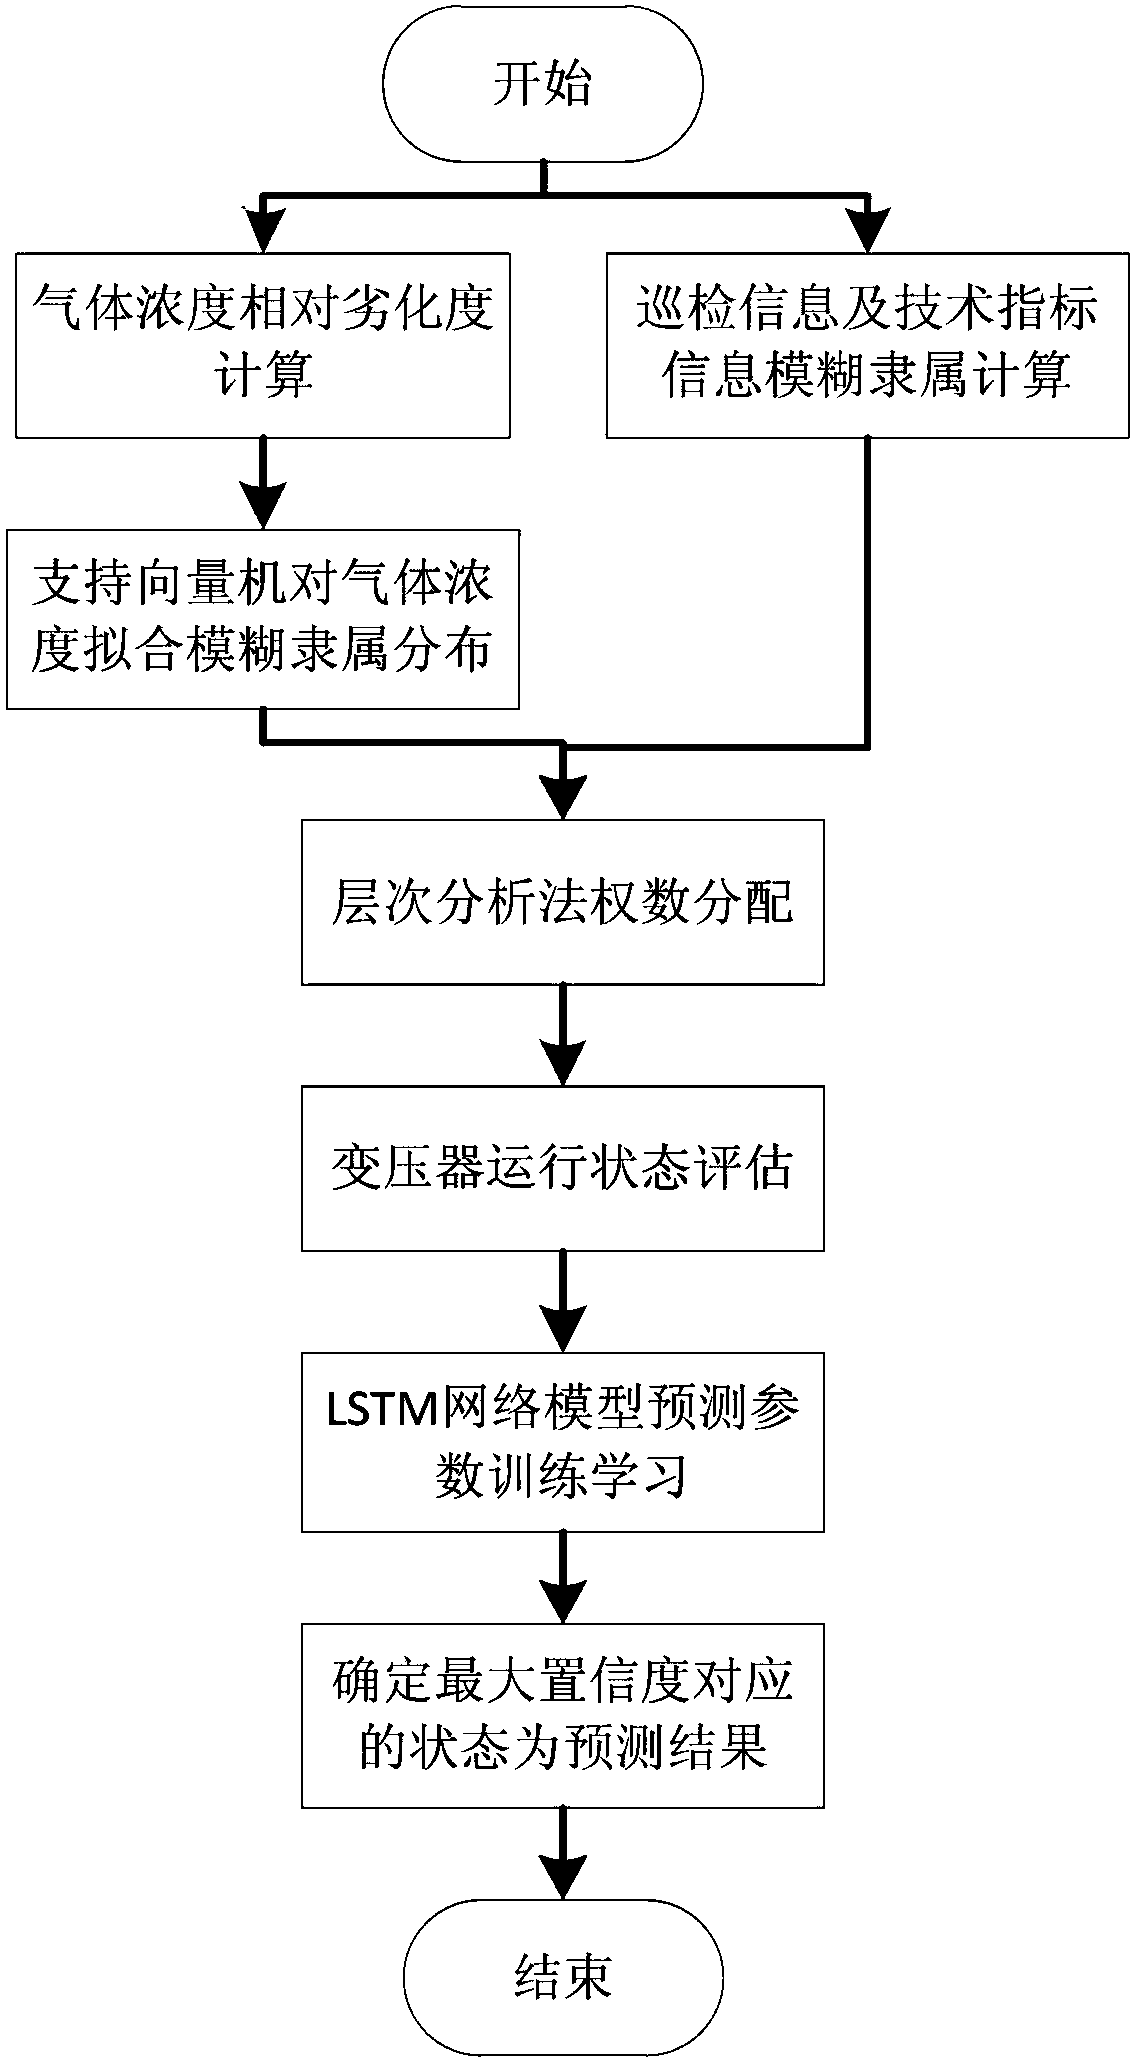 Transformer operation state prediction method based on long short term memory network and transformer operation state prediction system based on long short term memory network